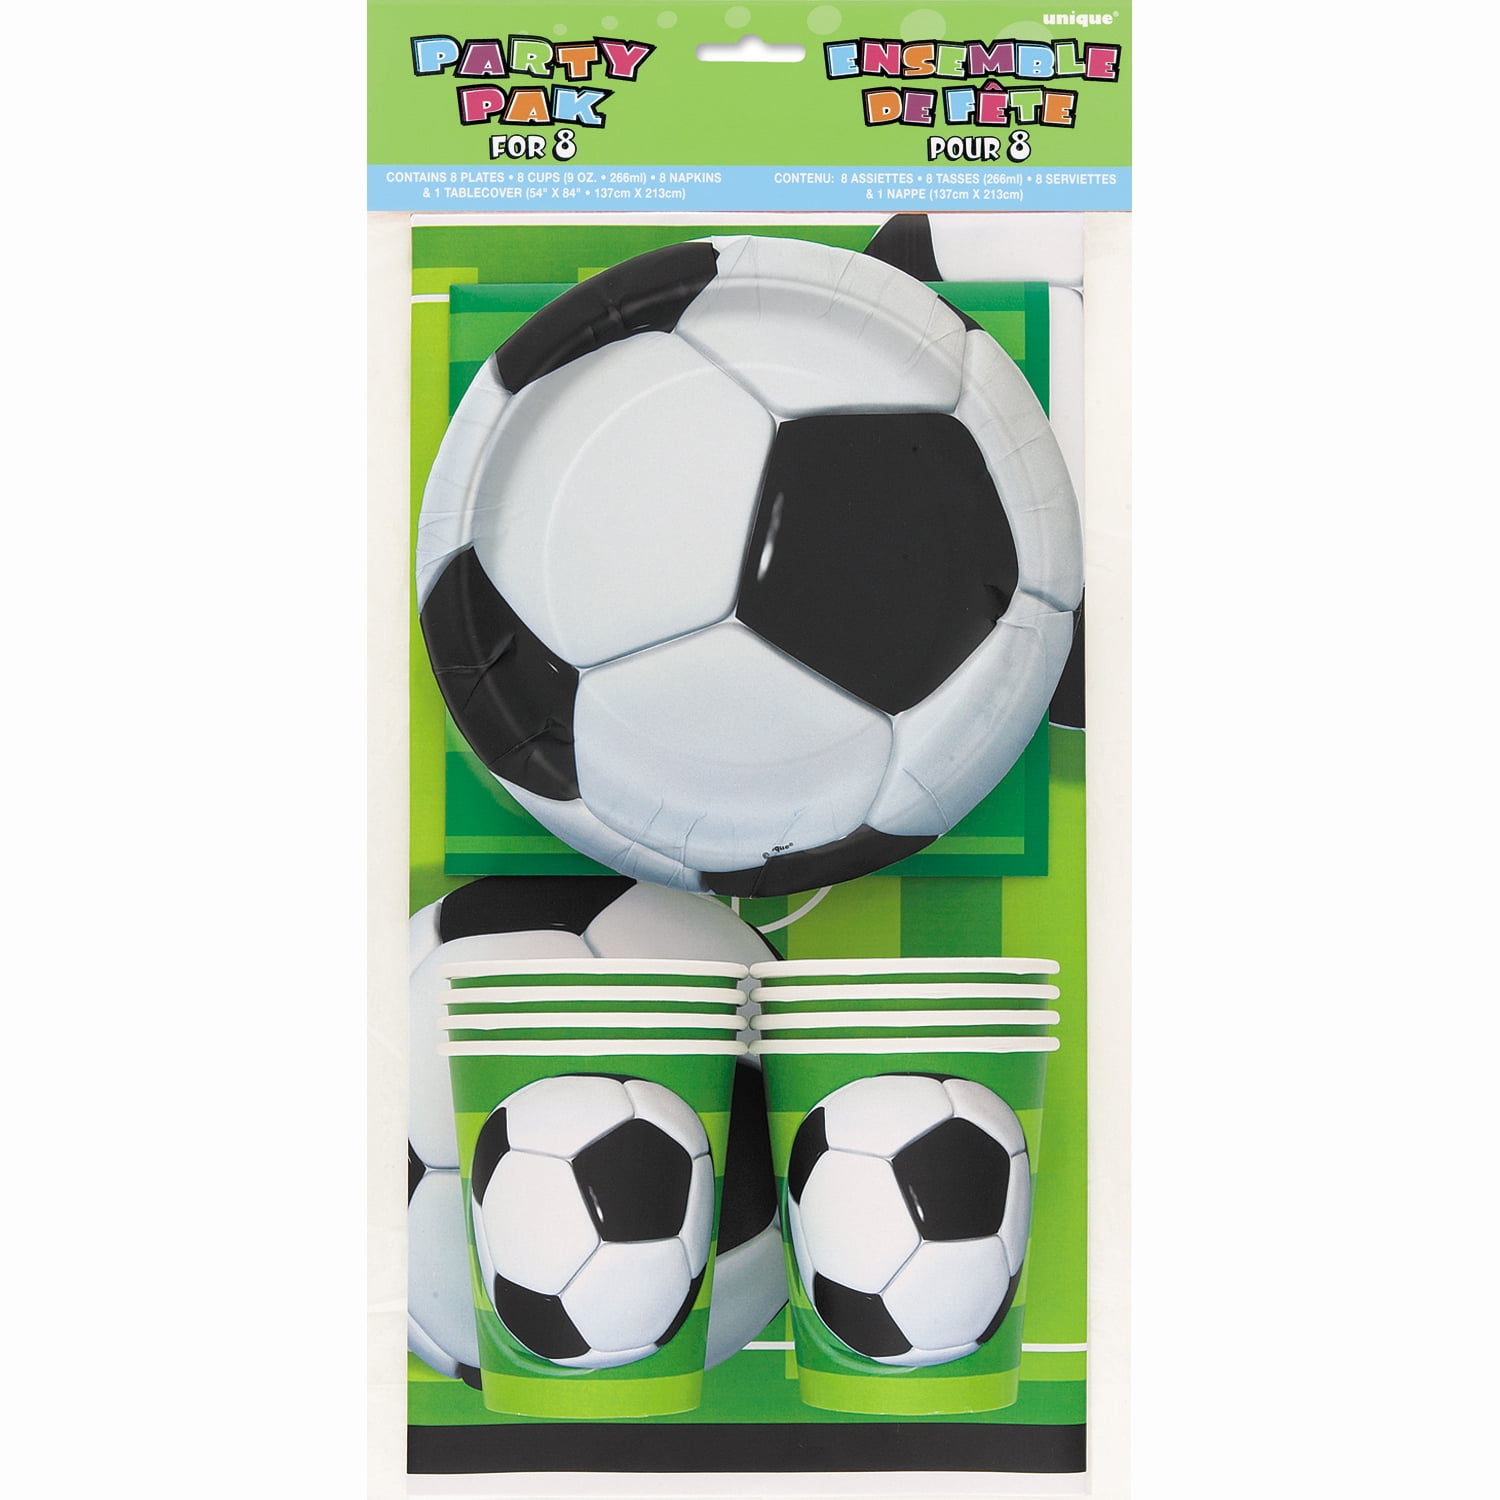 Sports Party Supplies For 18 Guests Cups Plates and Napkins GI 